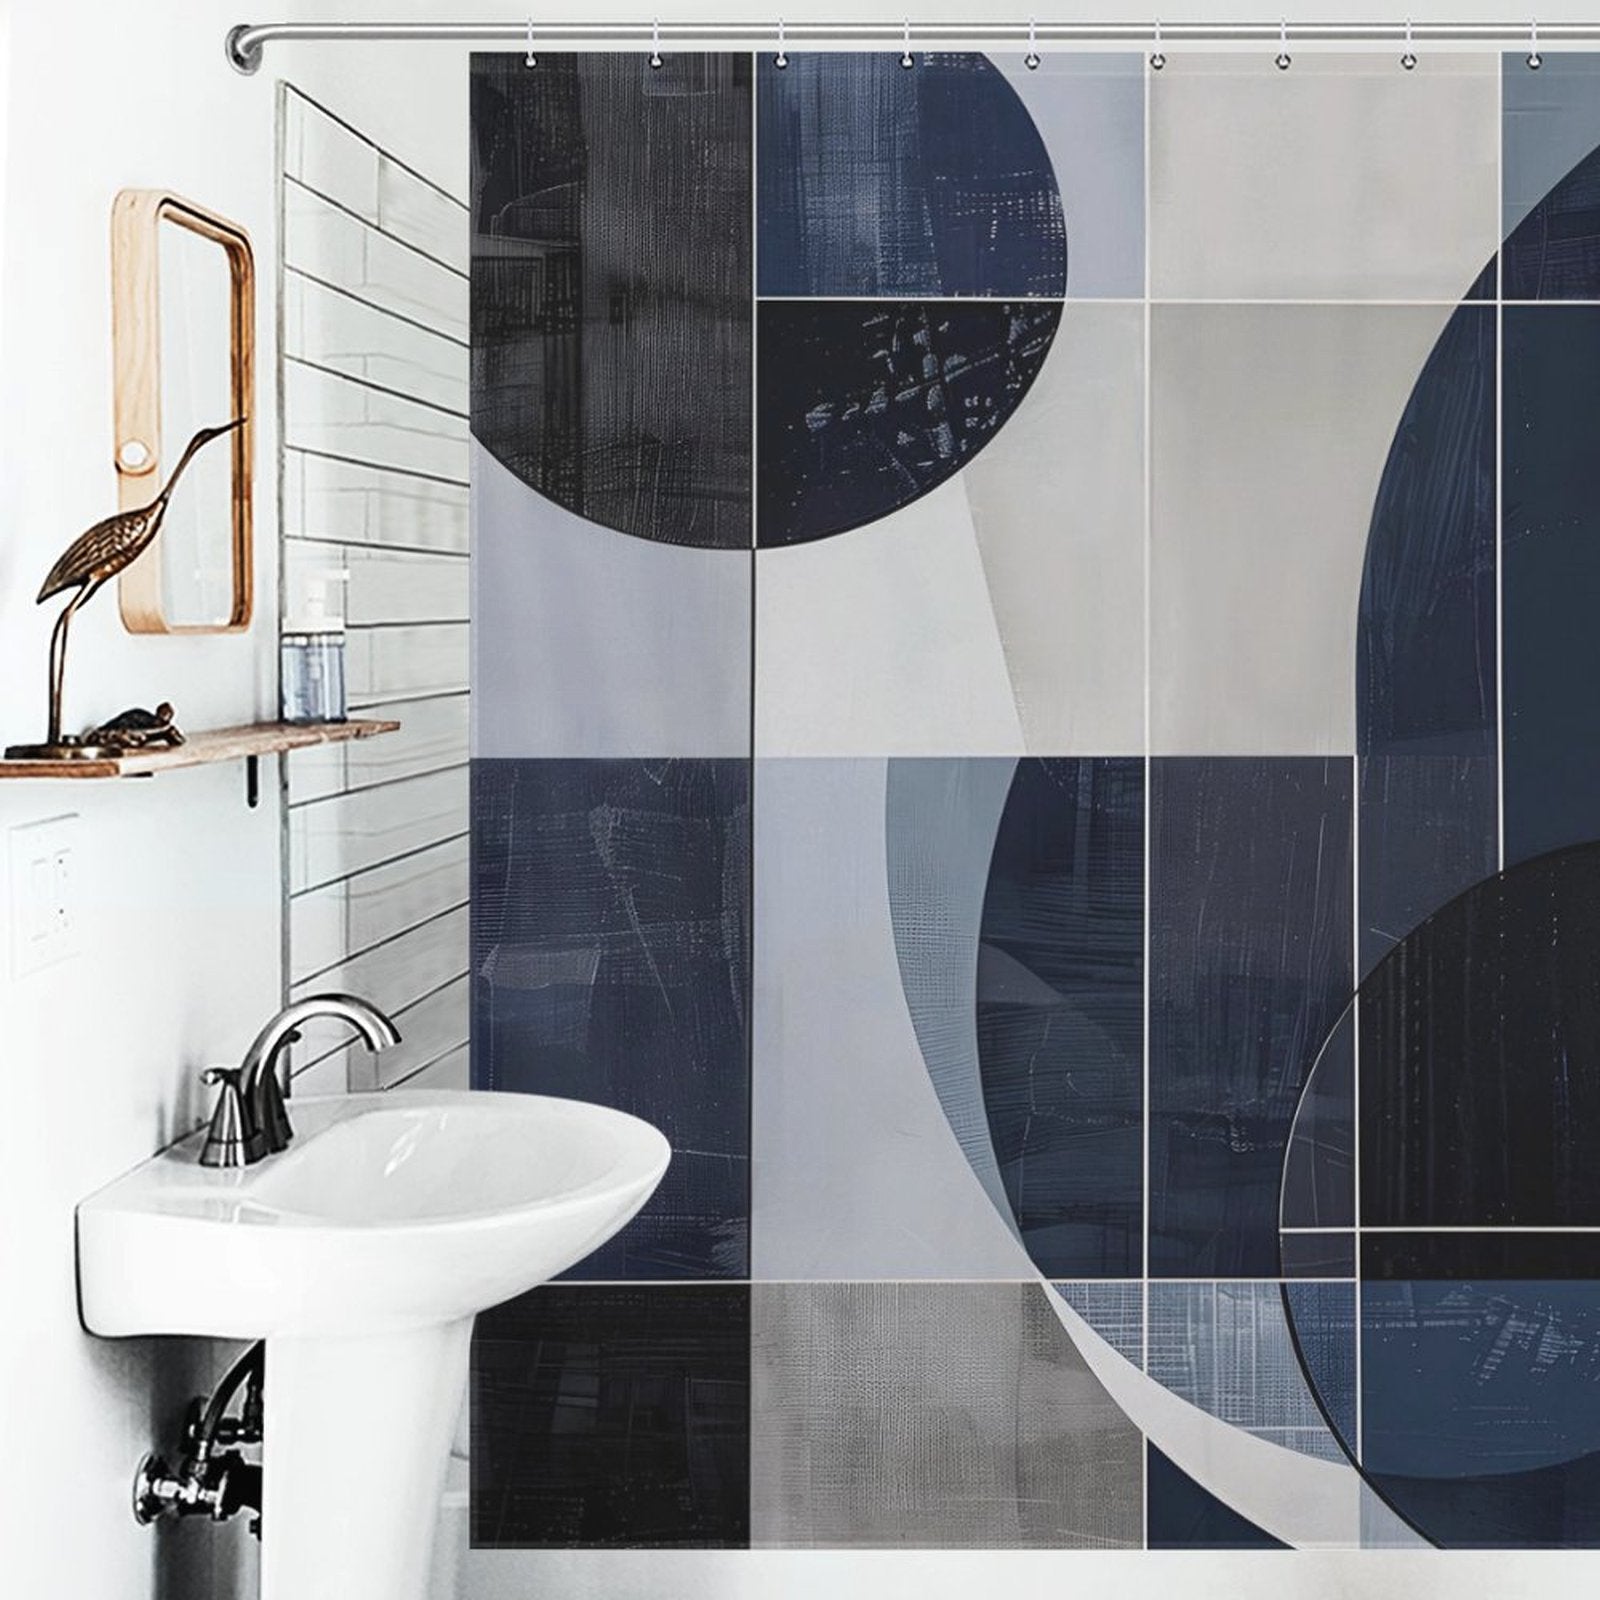 A bathroom with a white sink, wall-mounted mirror, soap dispenser, and a Cotton Cat Geometric Deep Blue Abstract Art Mid-Century Modern Style Shower Curtain-Cottoncat. The mid-century modern design adds a stylish touch to the serene space.